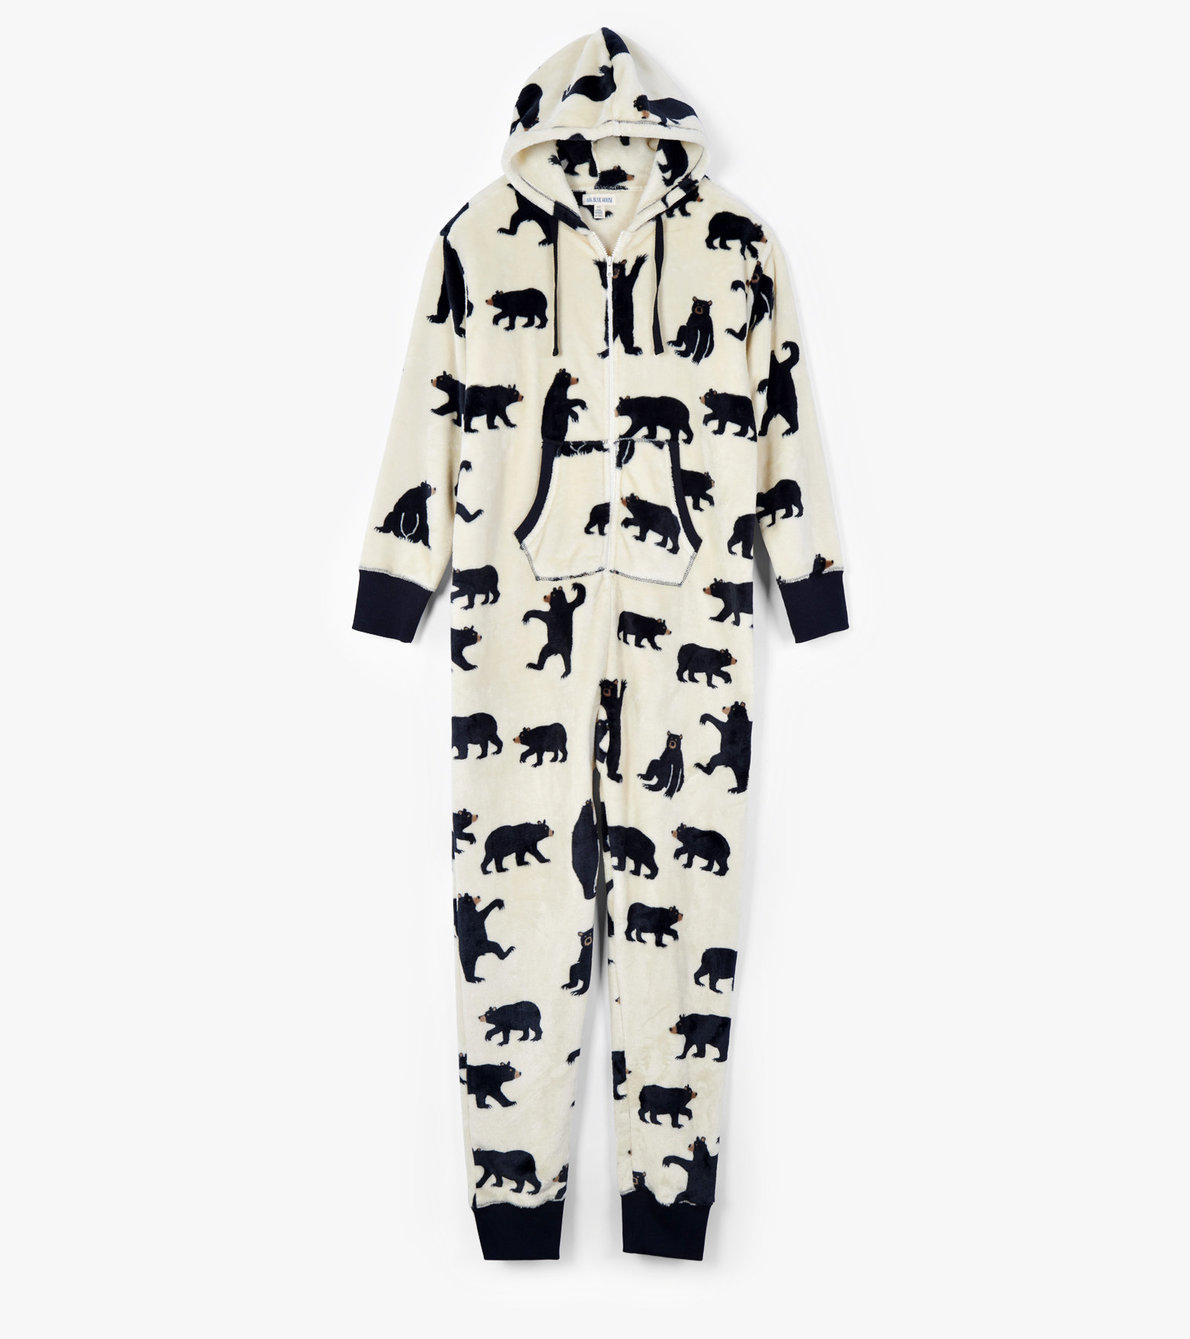 View larger image of Black Bears Adult Hooded Fleece Jumpsuit